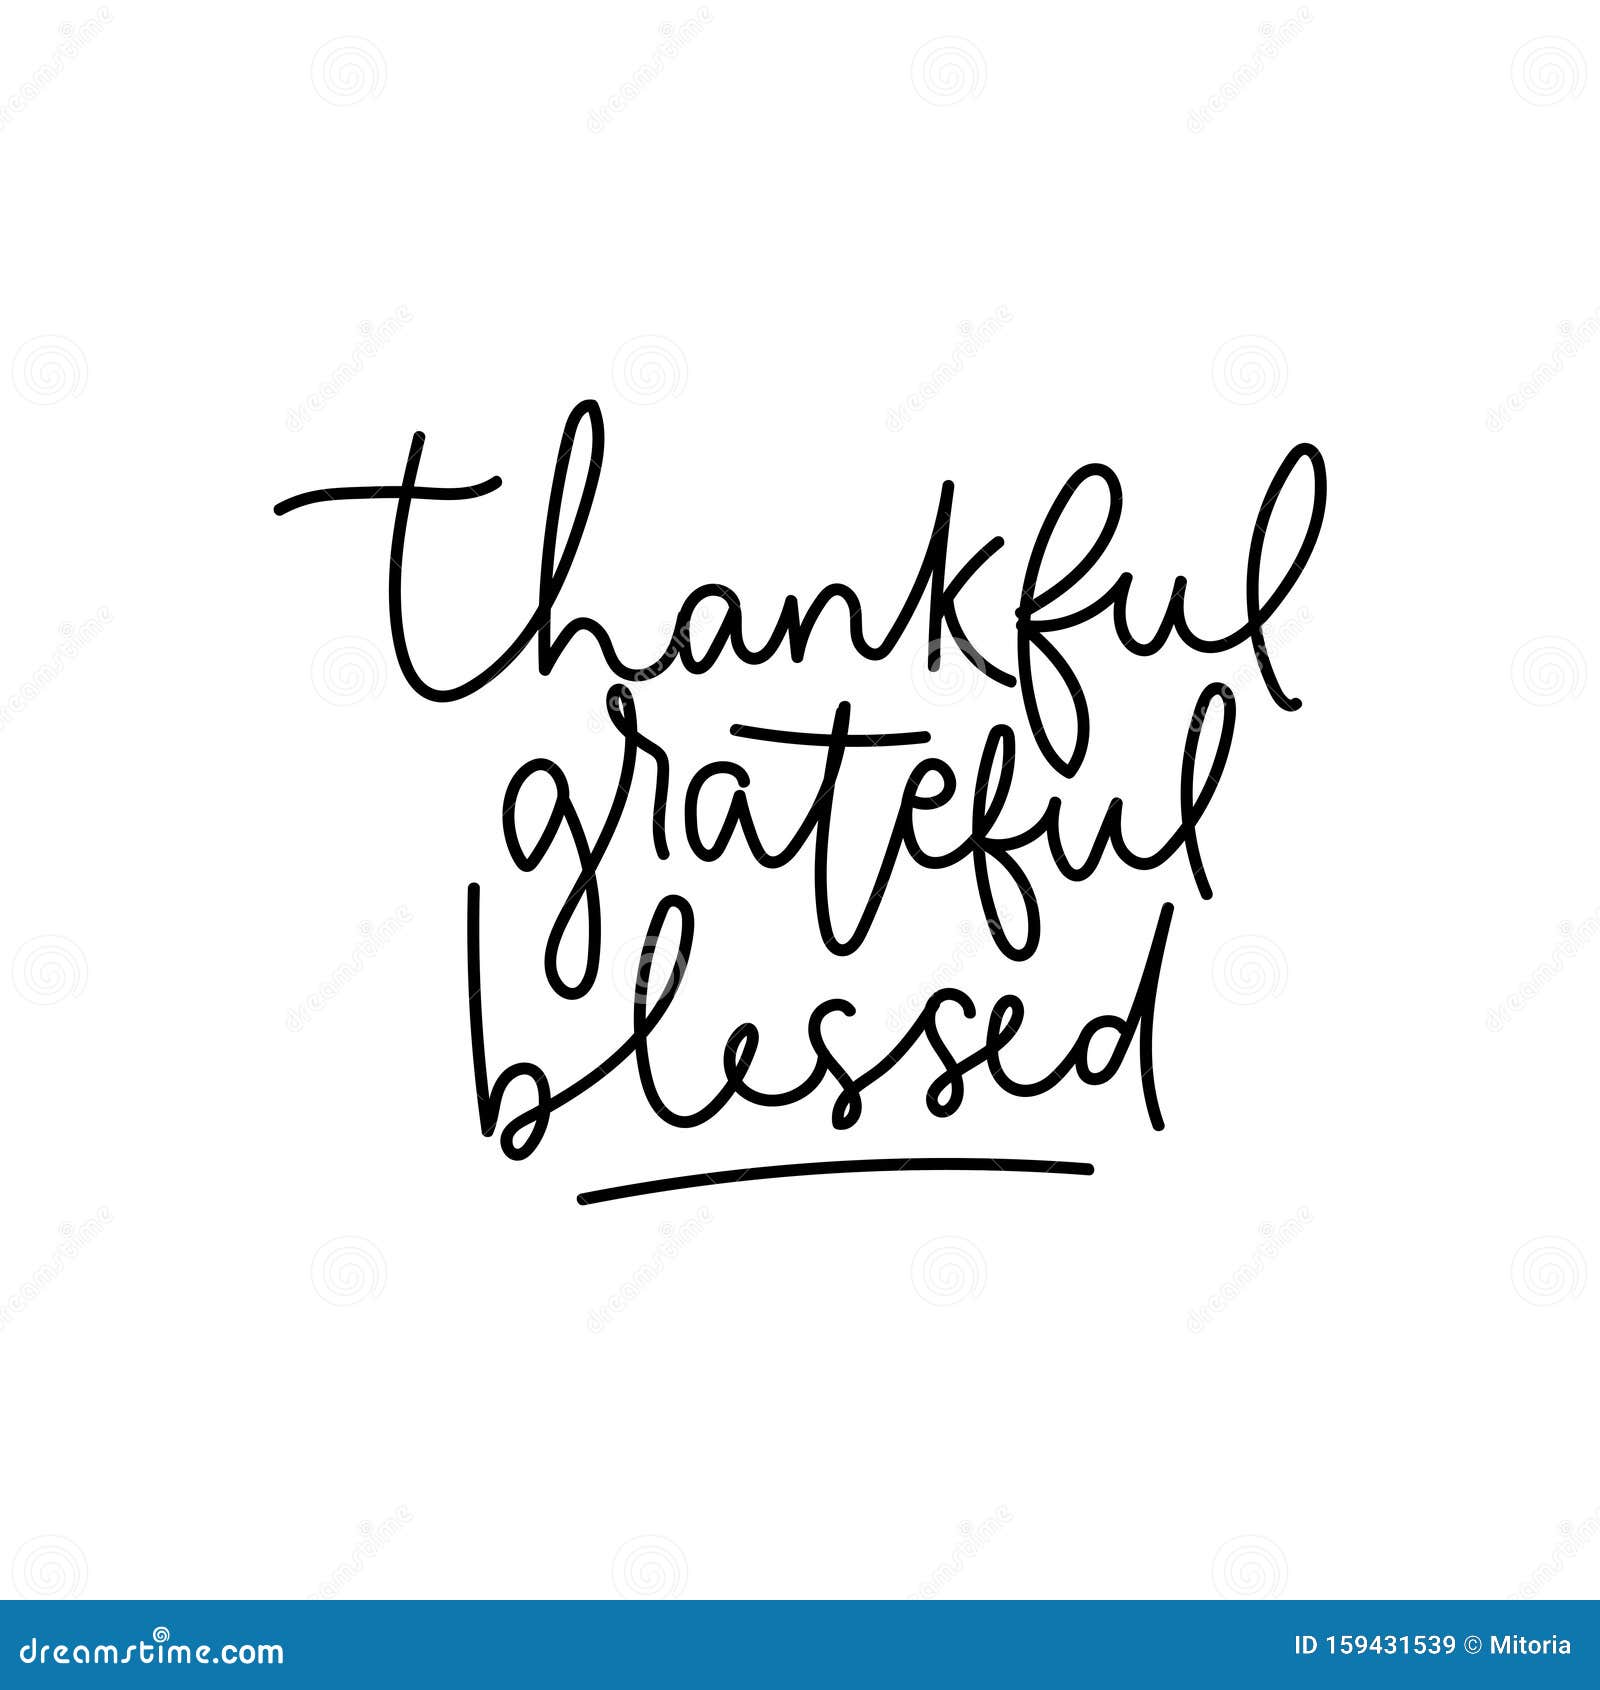 Download Thankful Grateful Blessed Handwriting Phrase Stock Vector ...